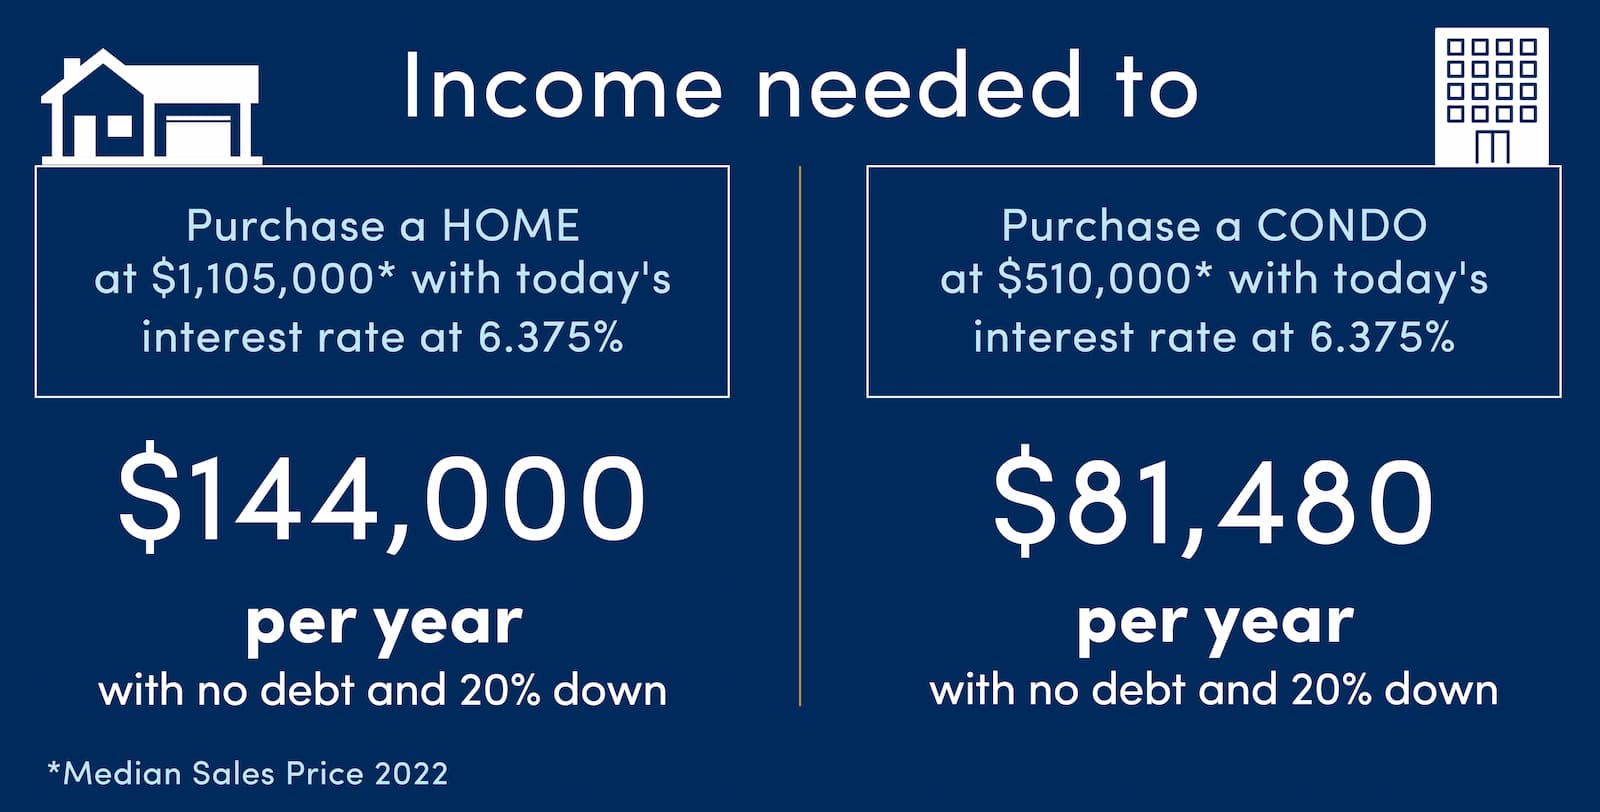 Income needed to purchase home in Hawaii in 2023